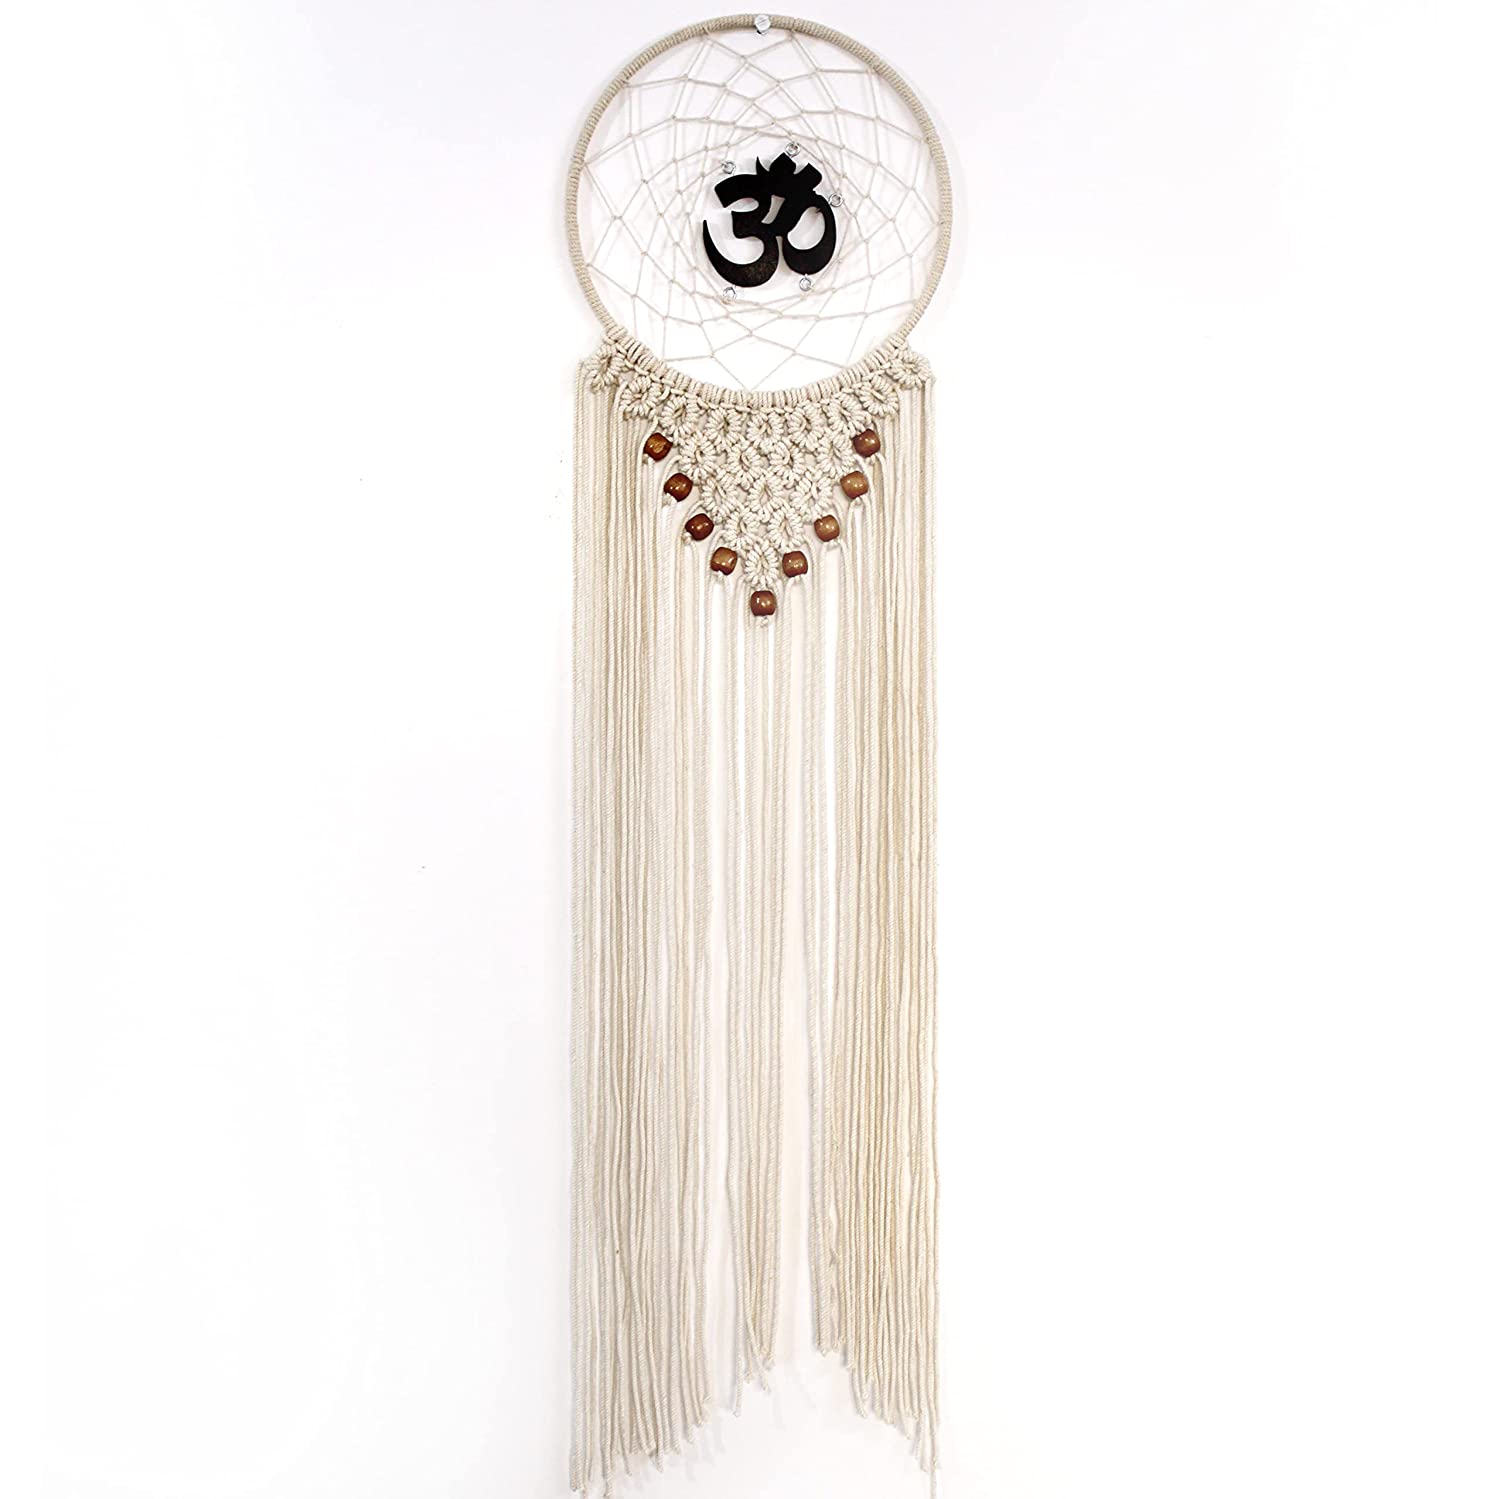 Om Macrame with Decorative Beads Design Wall Hanging